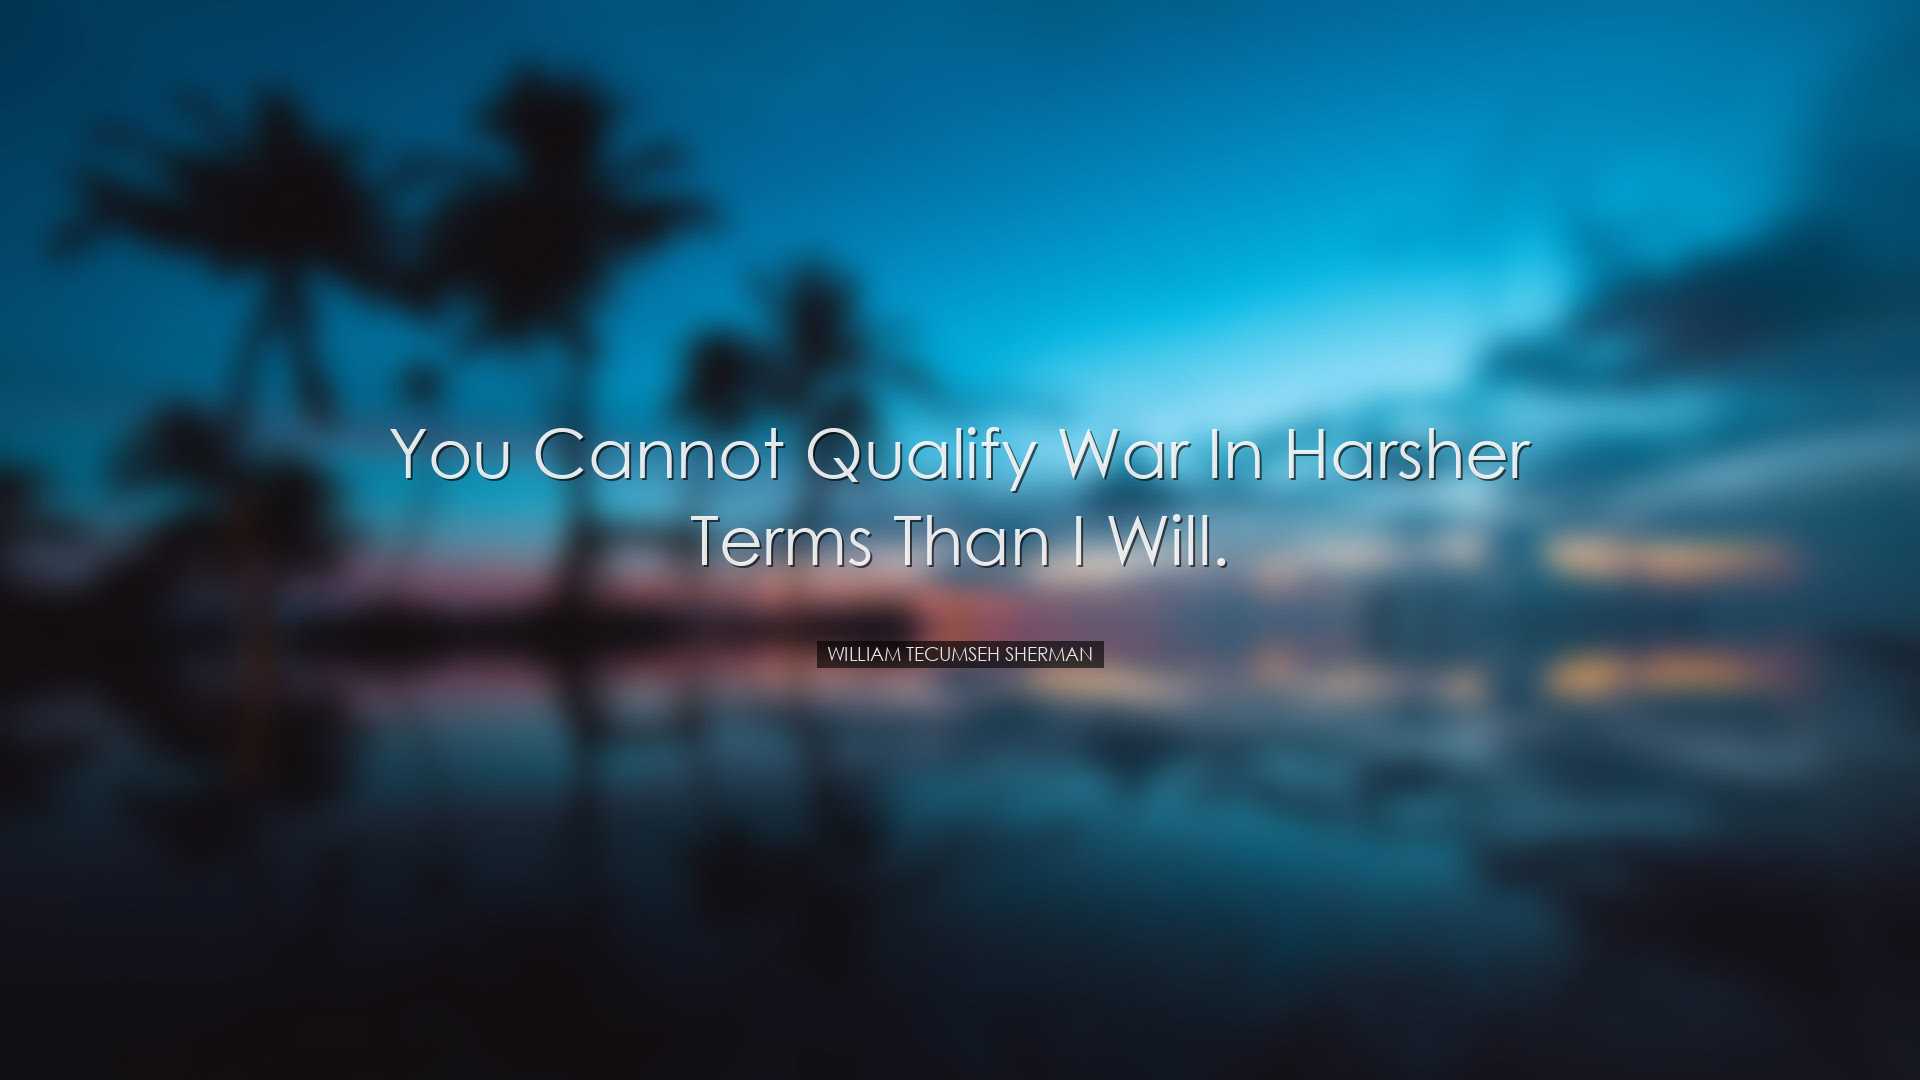 You cannot qualify war in harsher terms than I will. - William Tec